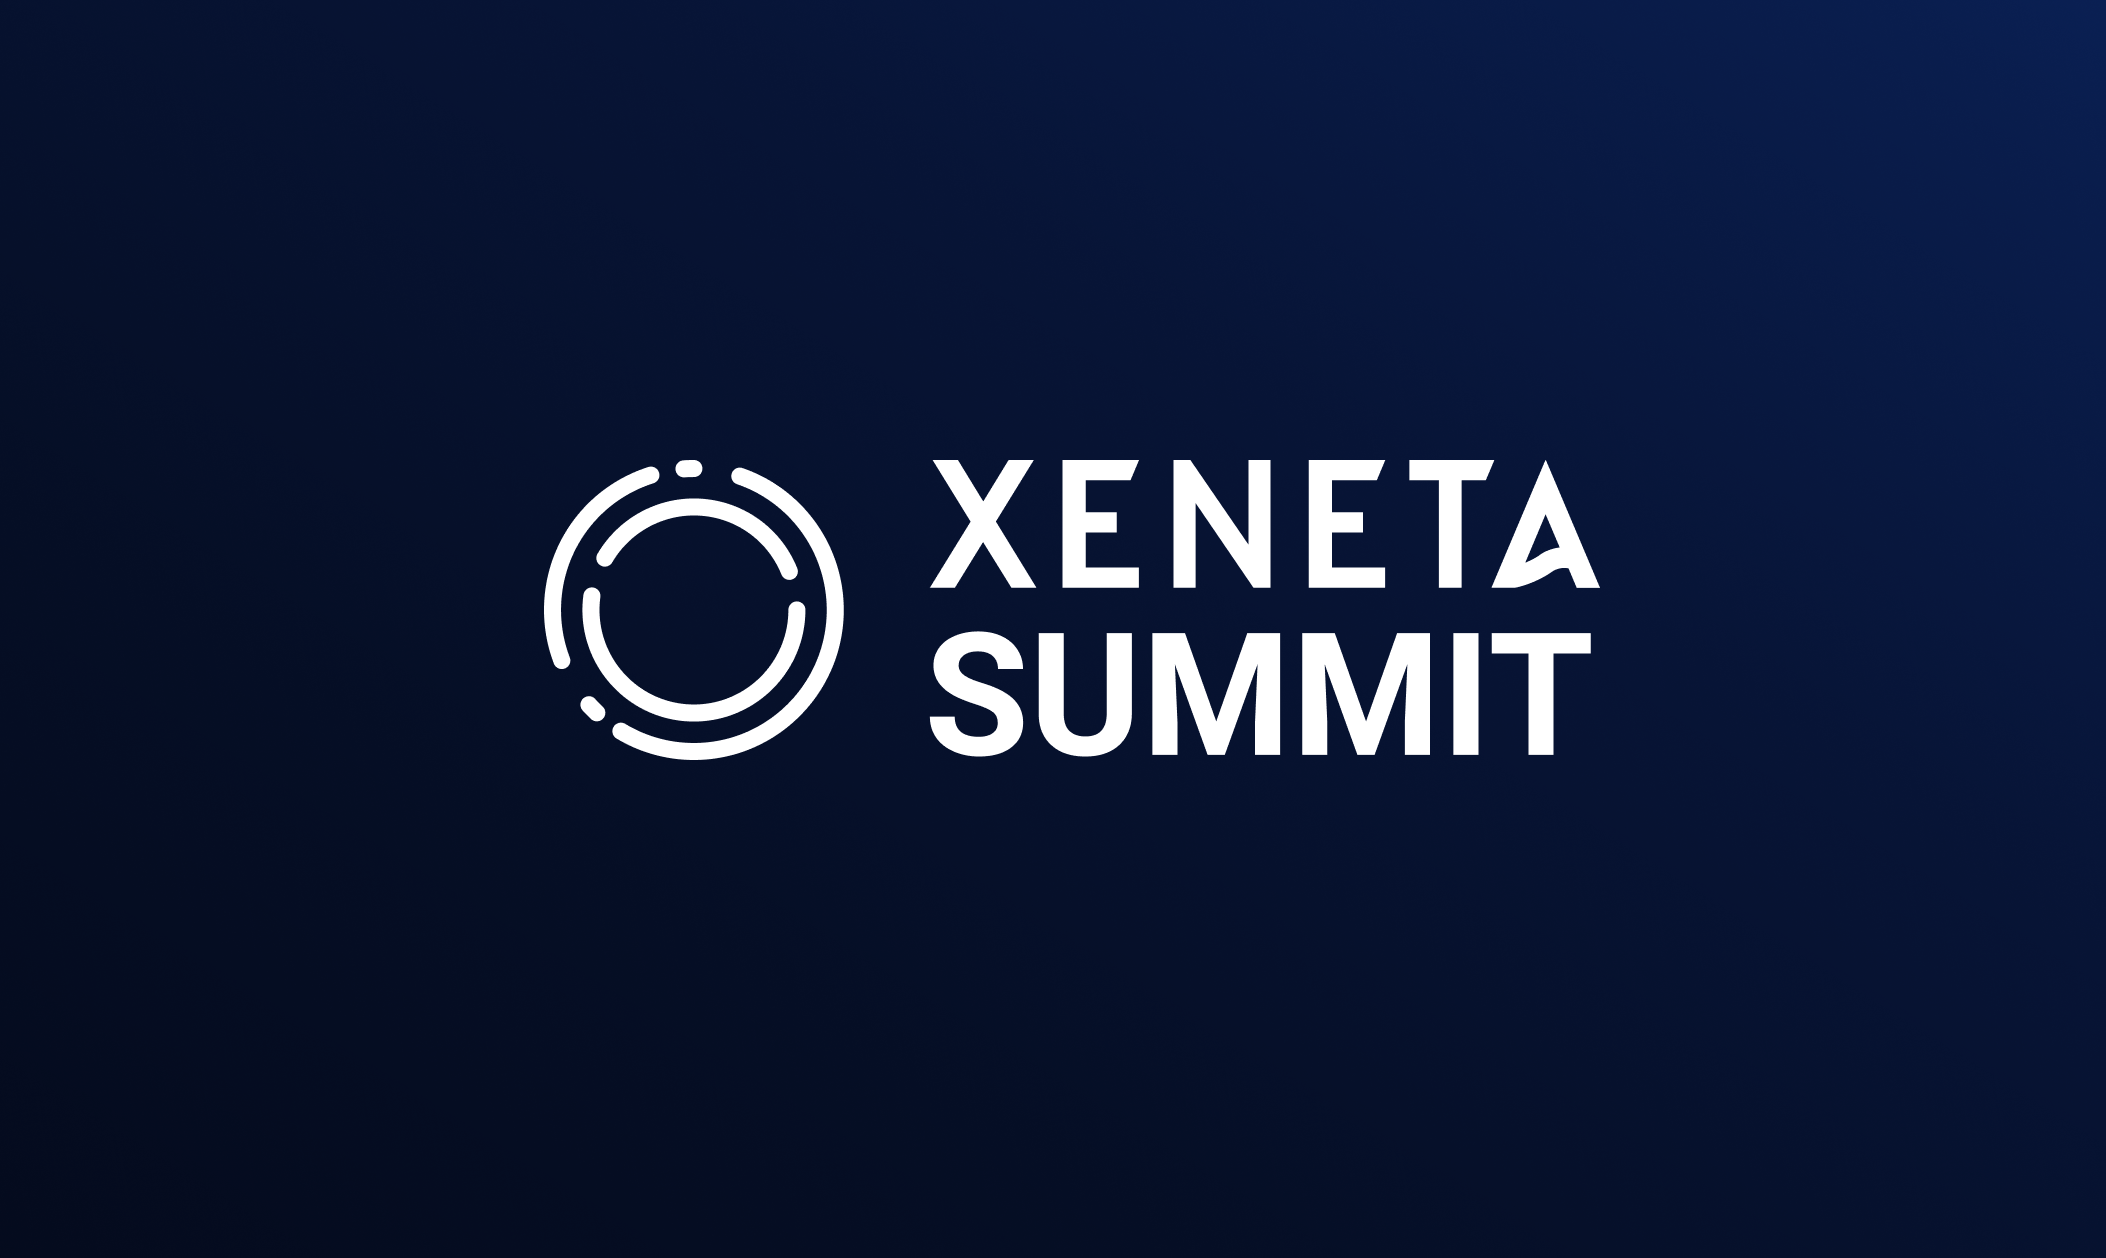 Xeneta Summit Day 1 in Amsterdam. Rolf Habben Jansen, CEO of Hapag Lloyd delivers keynote speech to emphasize the necessity of the ocean industry. 